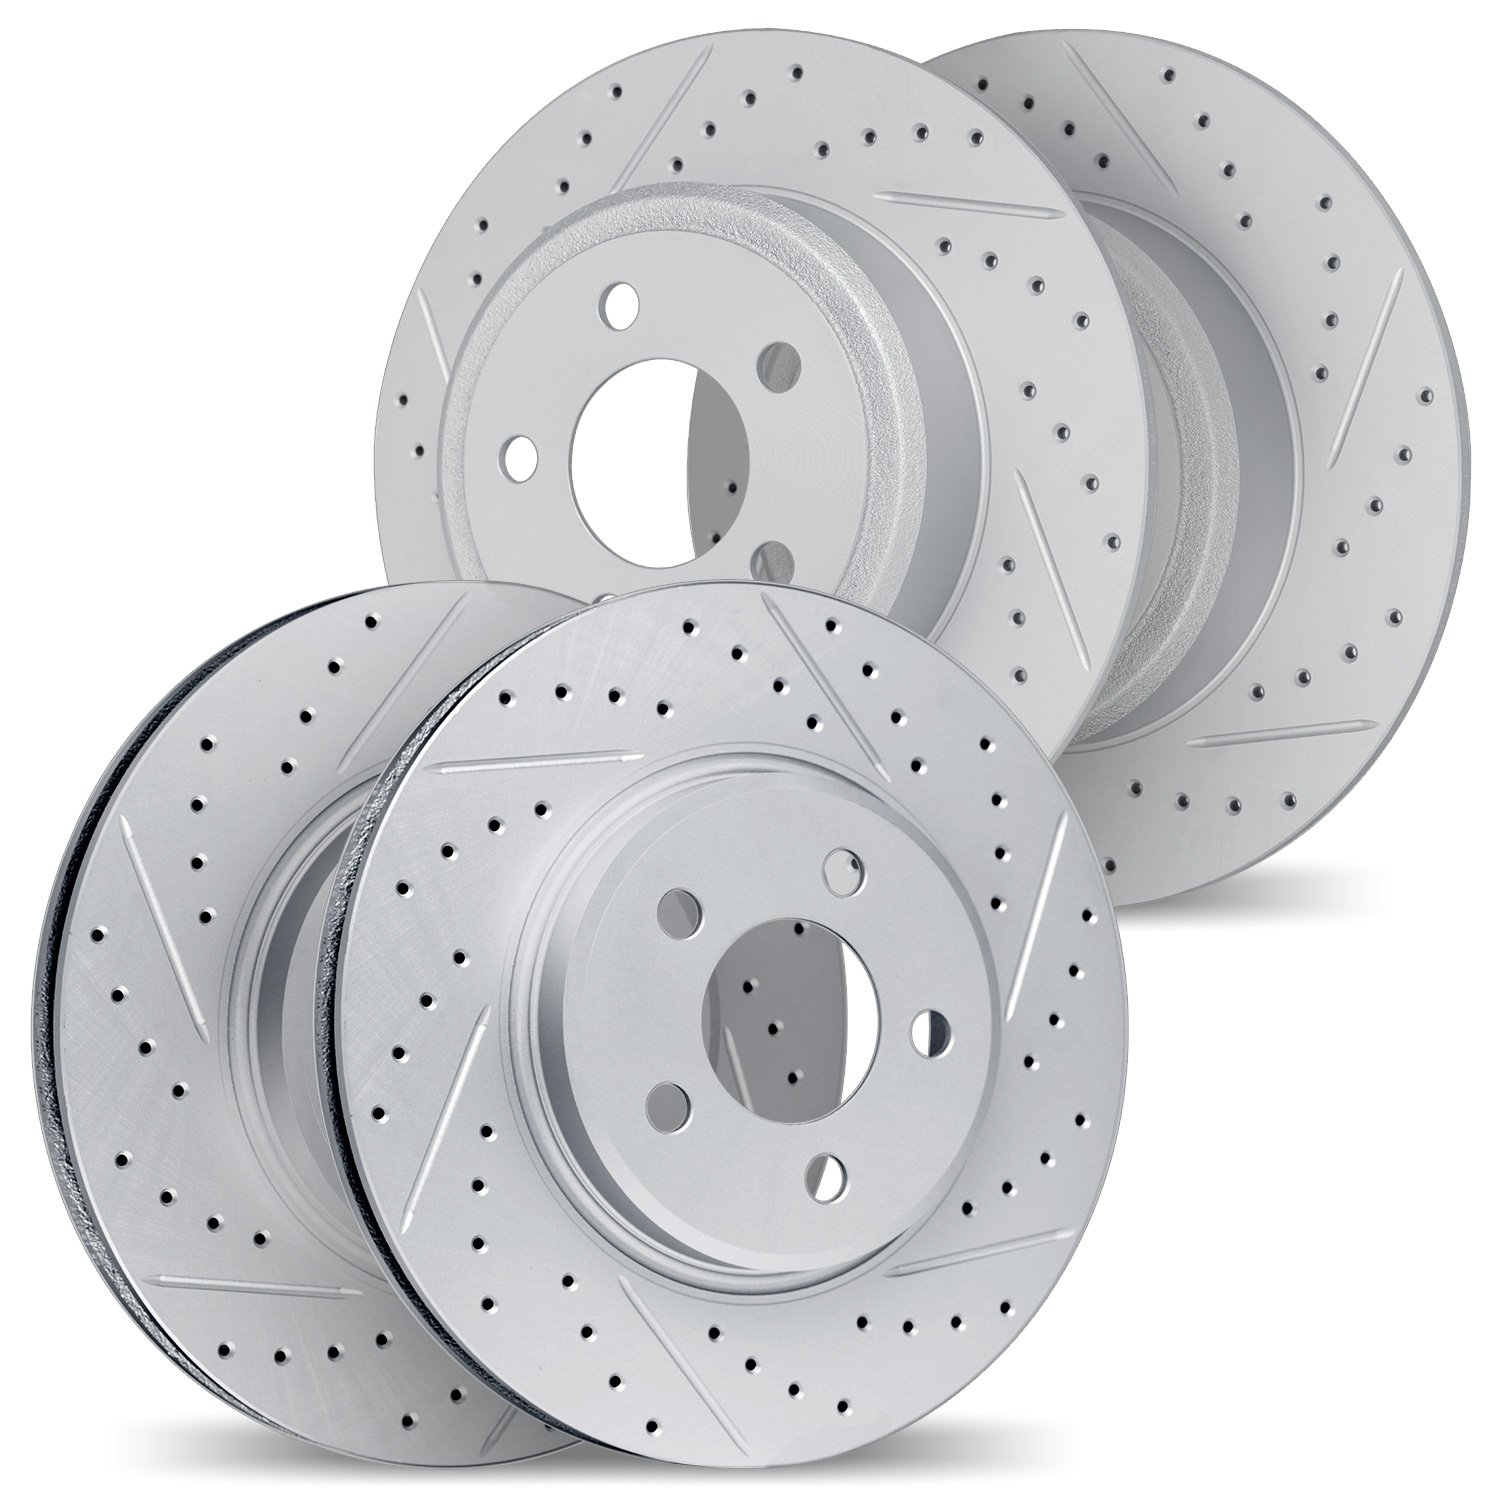 2004-59010 Geoperformance Drilled/Slotted Brake Rotors, 1997-2001 Acura/Honda, Position: Front and Rear